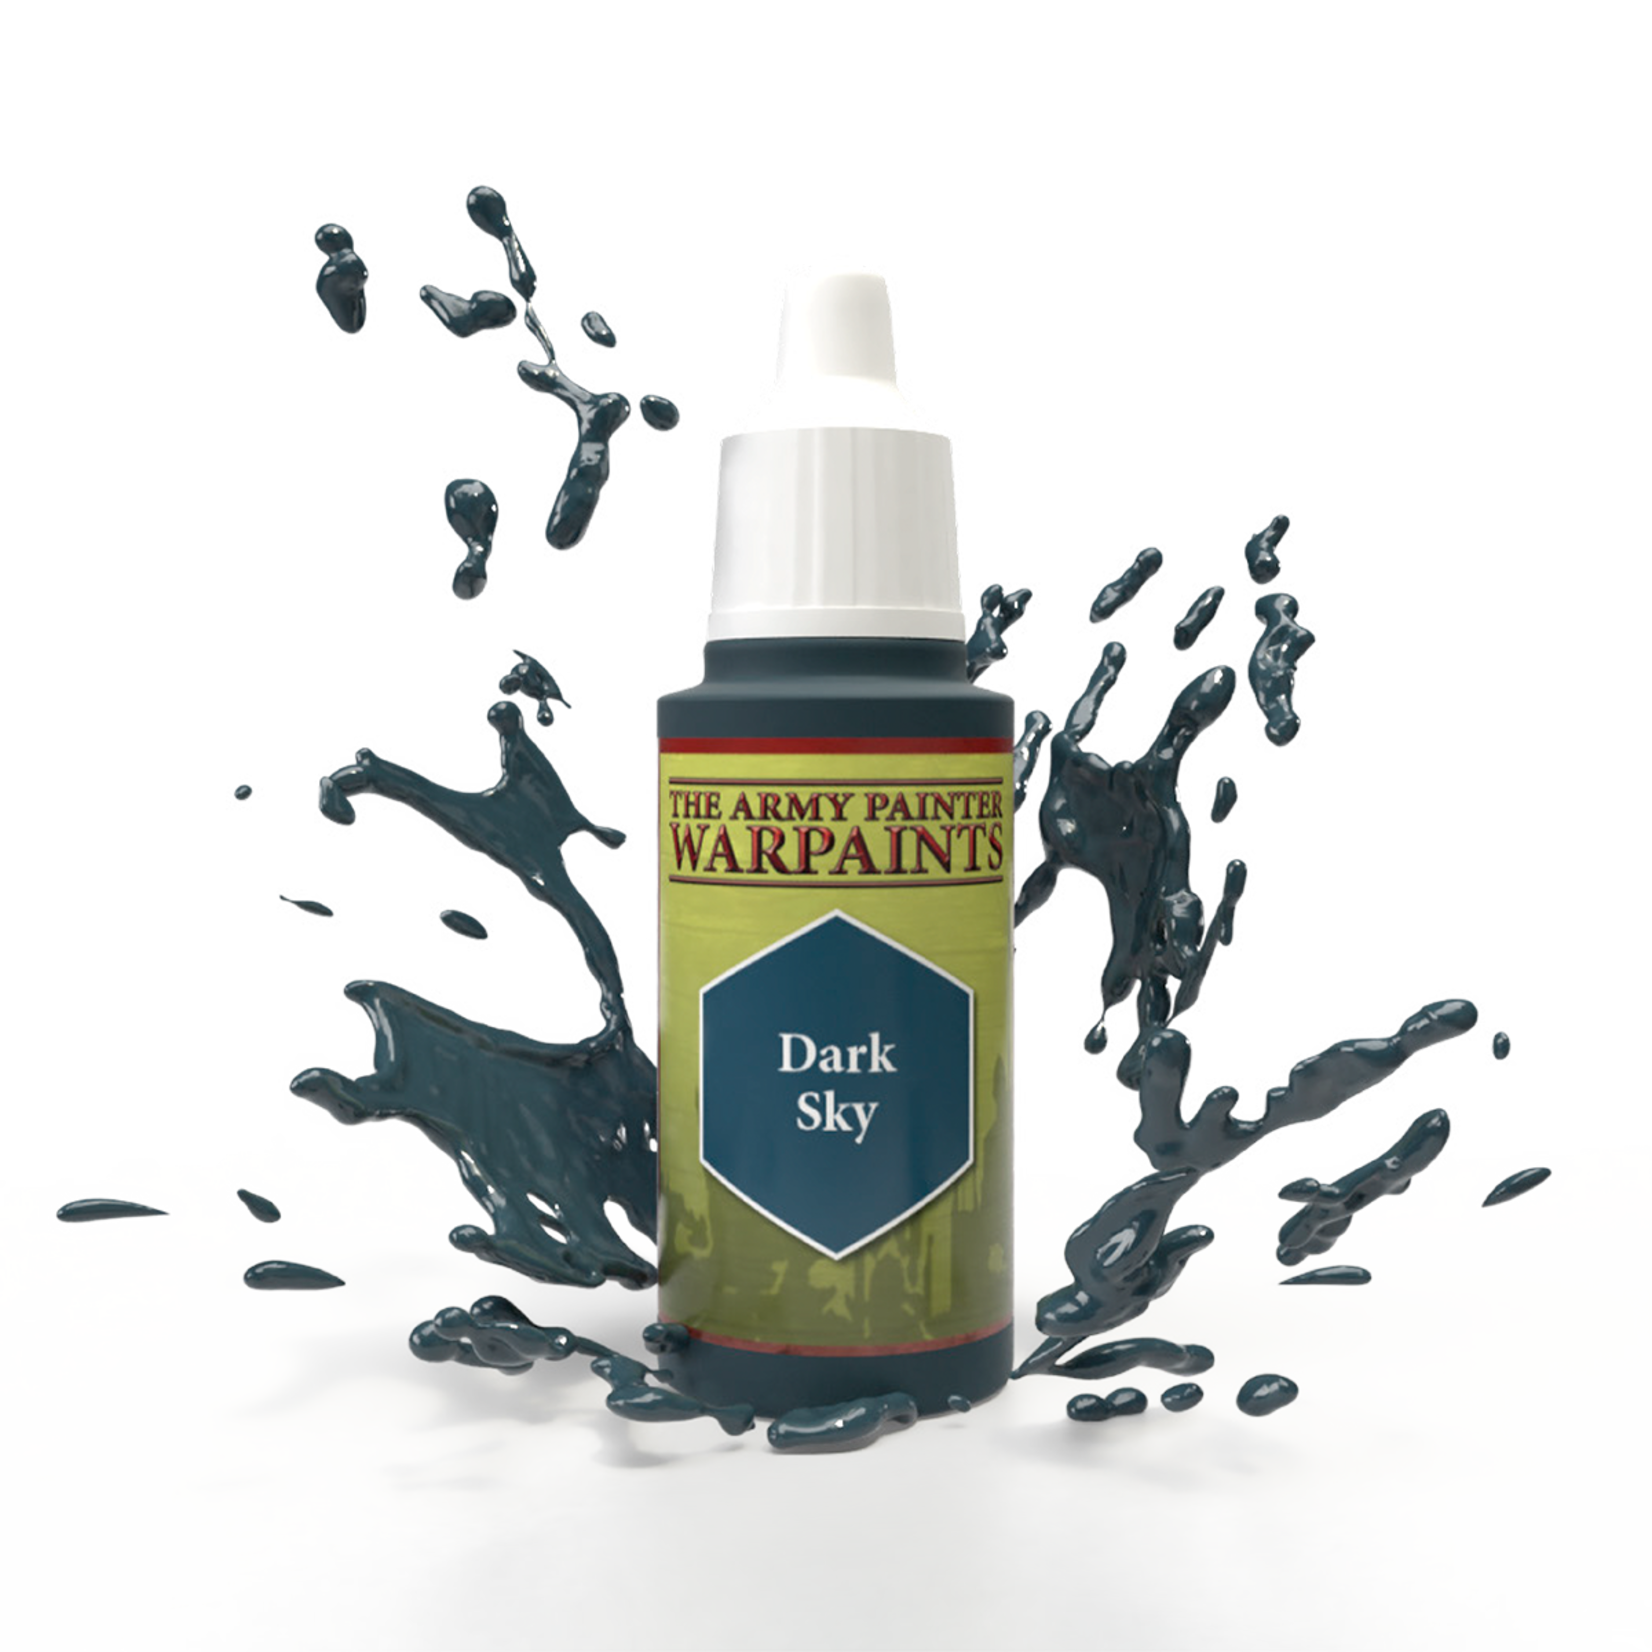 The Army Painter The Army Painter Warpaints: Dark Sky 18ml